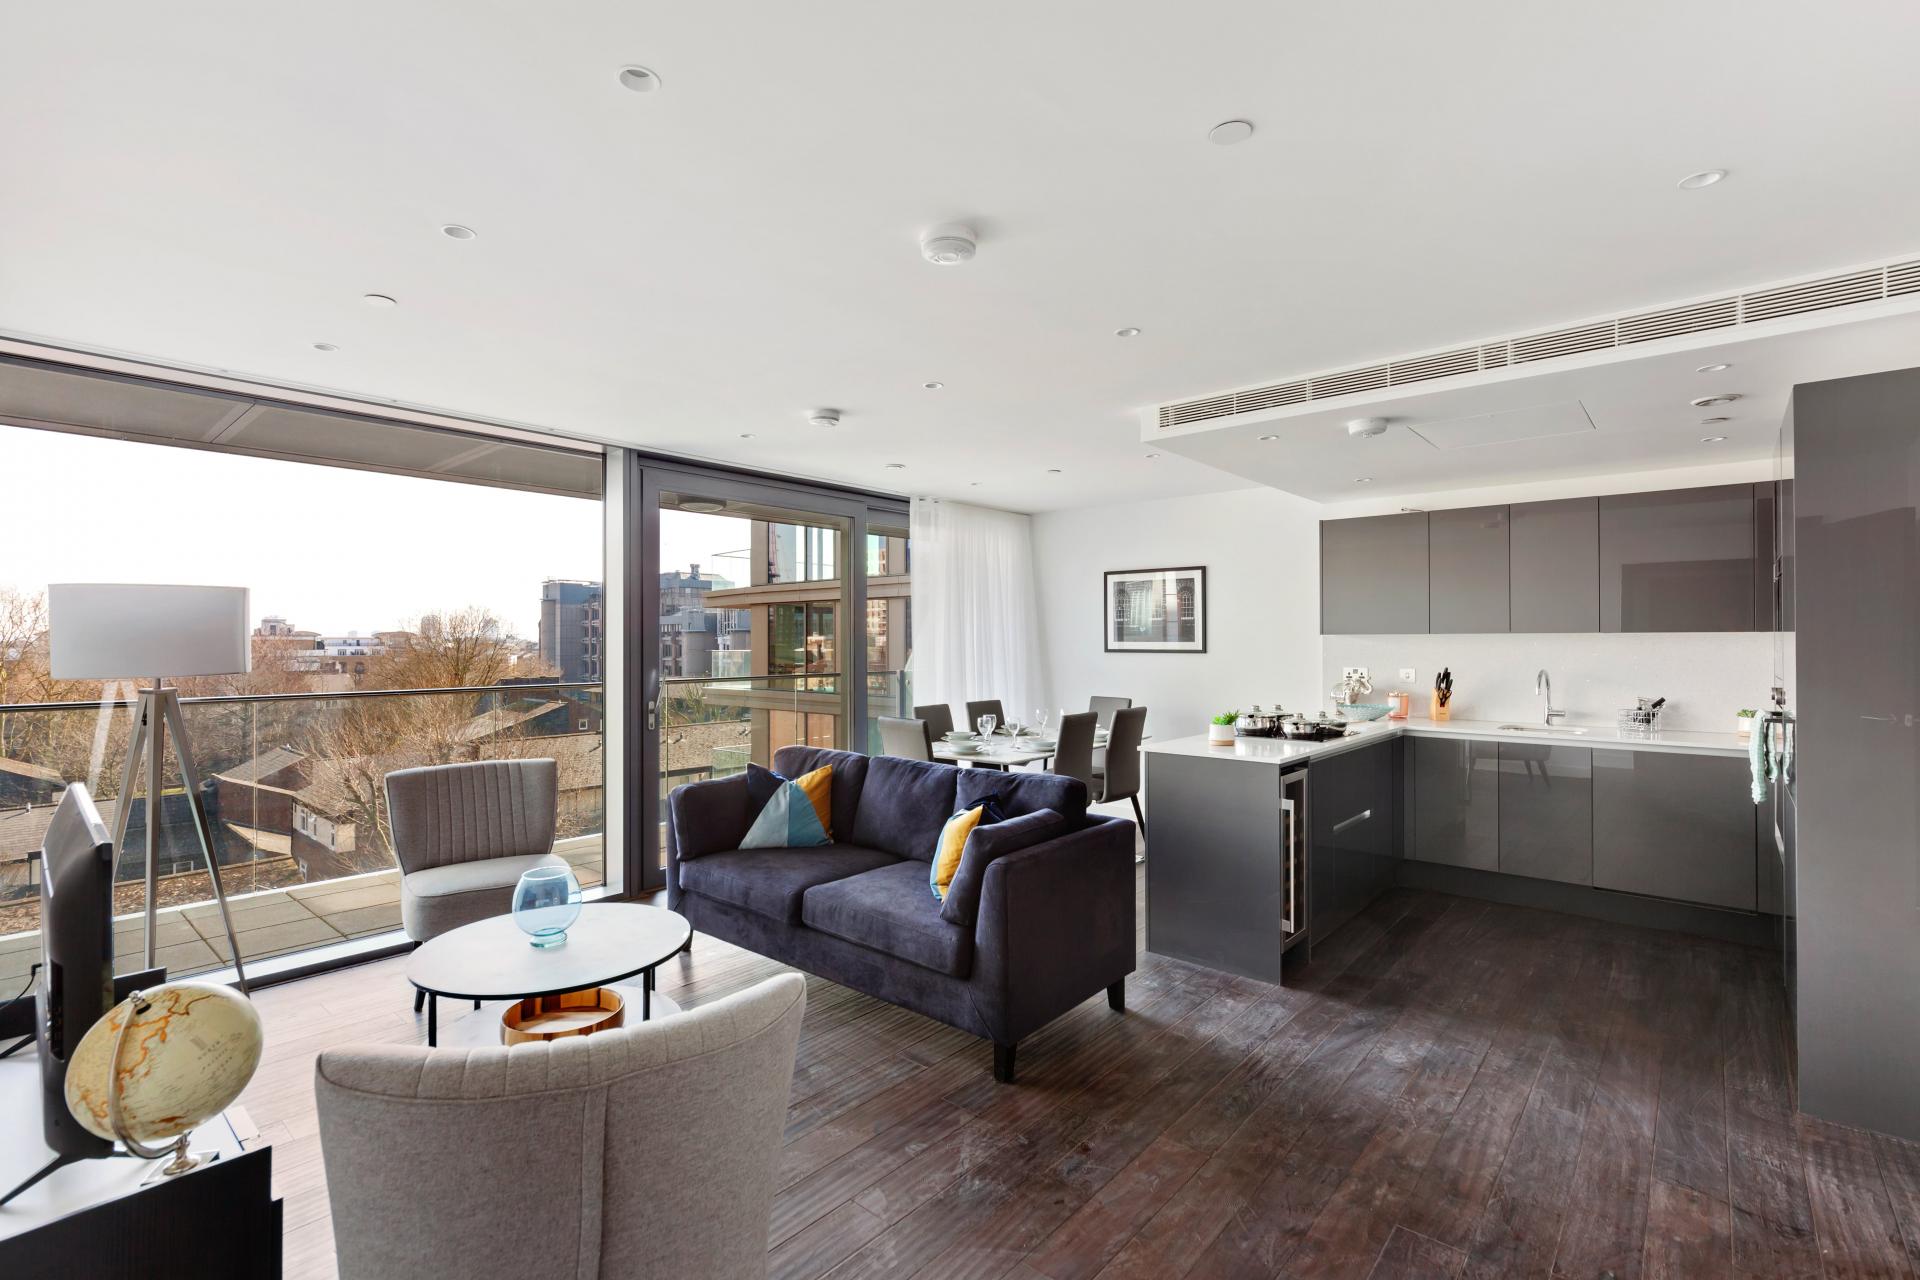 Tower Hill Serviced Accommodation with lift, reception, pool, gym, jacuzzi, garden & cinema! Book Luxury Apartments in The City of London now Urban Stay